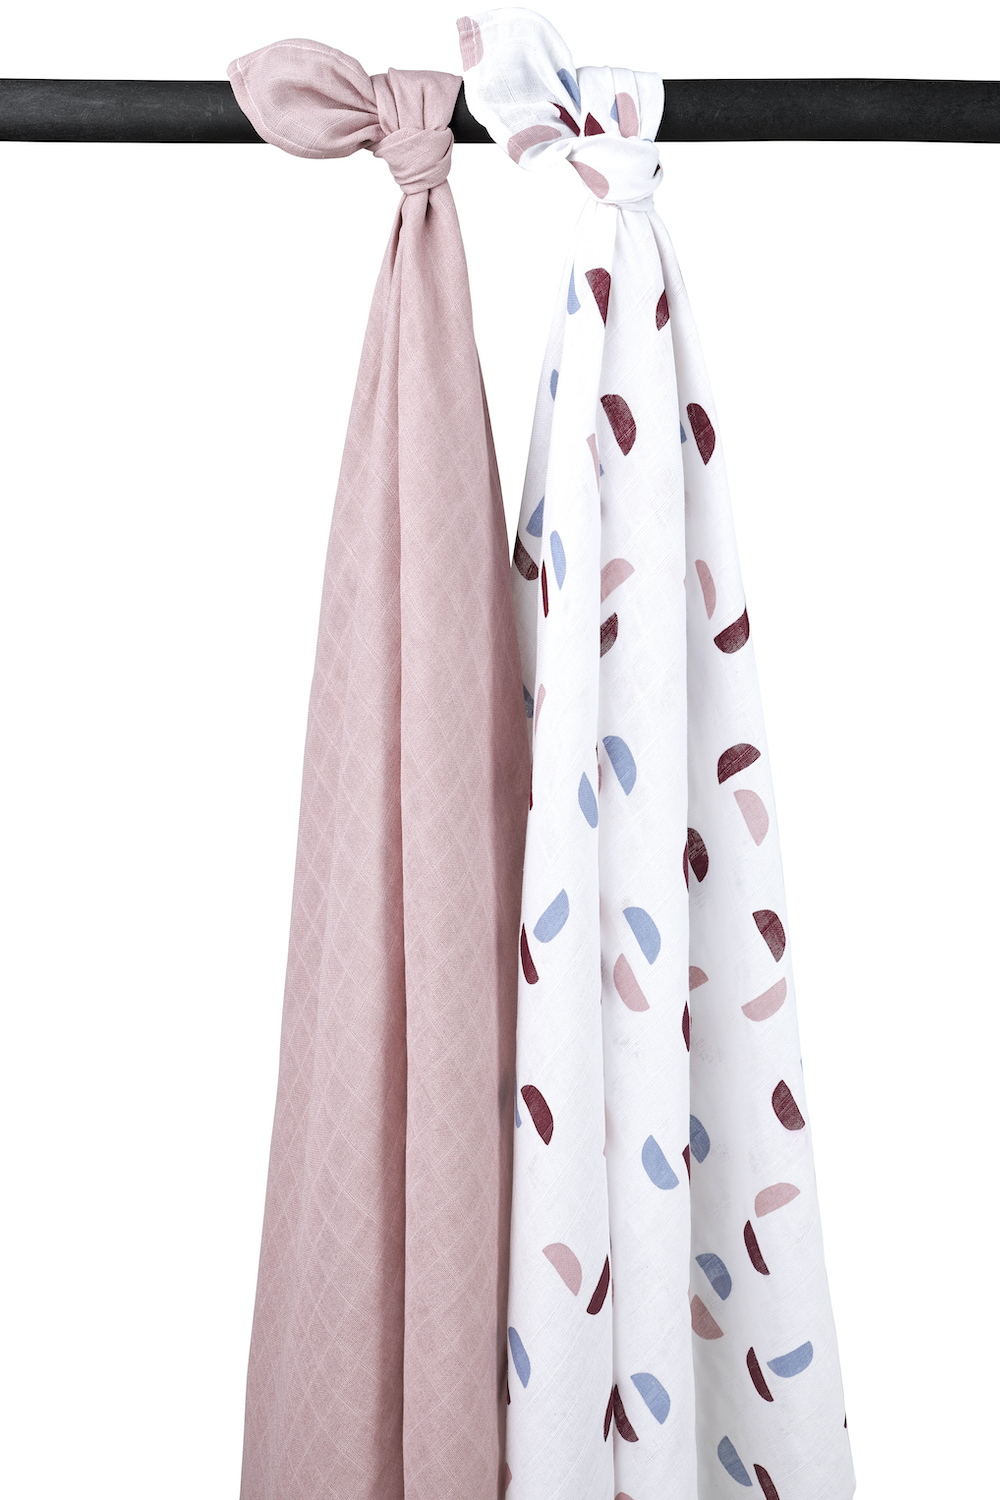 Muslin Swaddles 2-pack Shapes - Lilac - 120x120cm